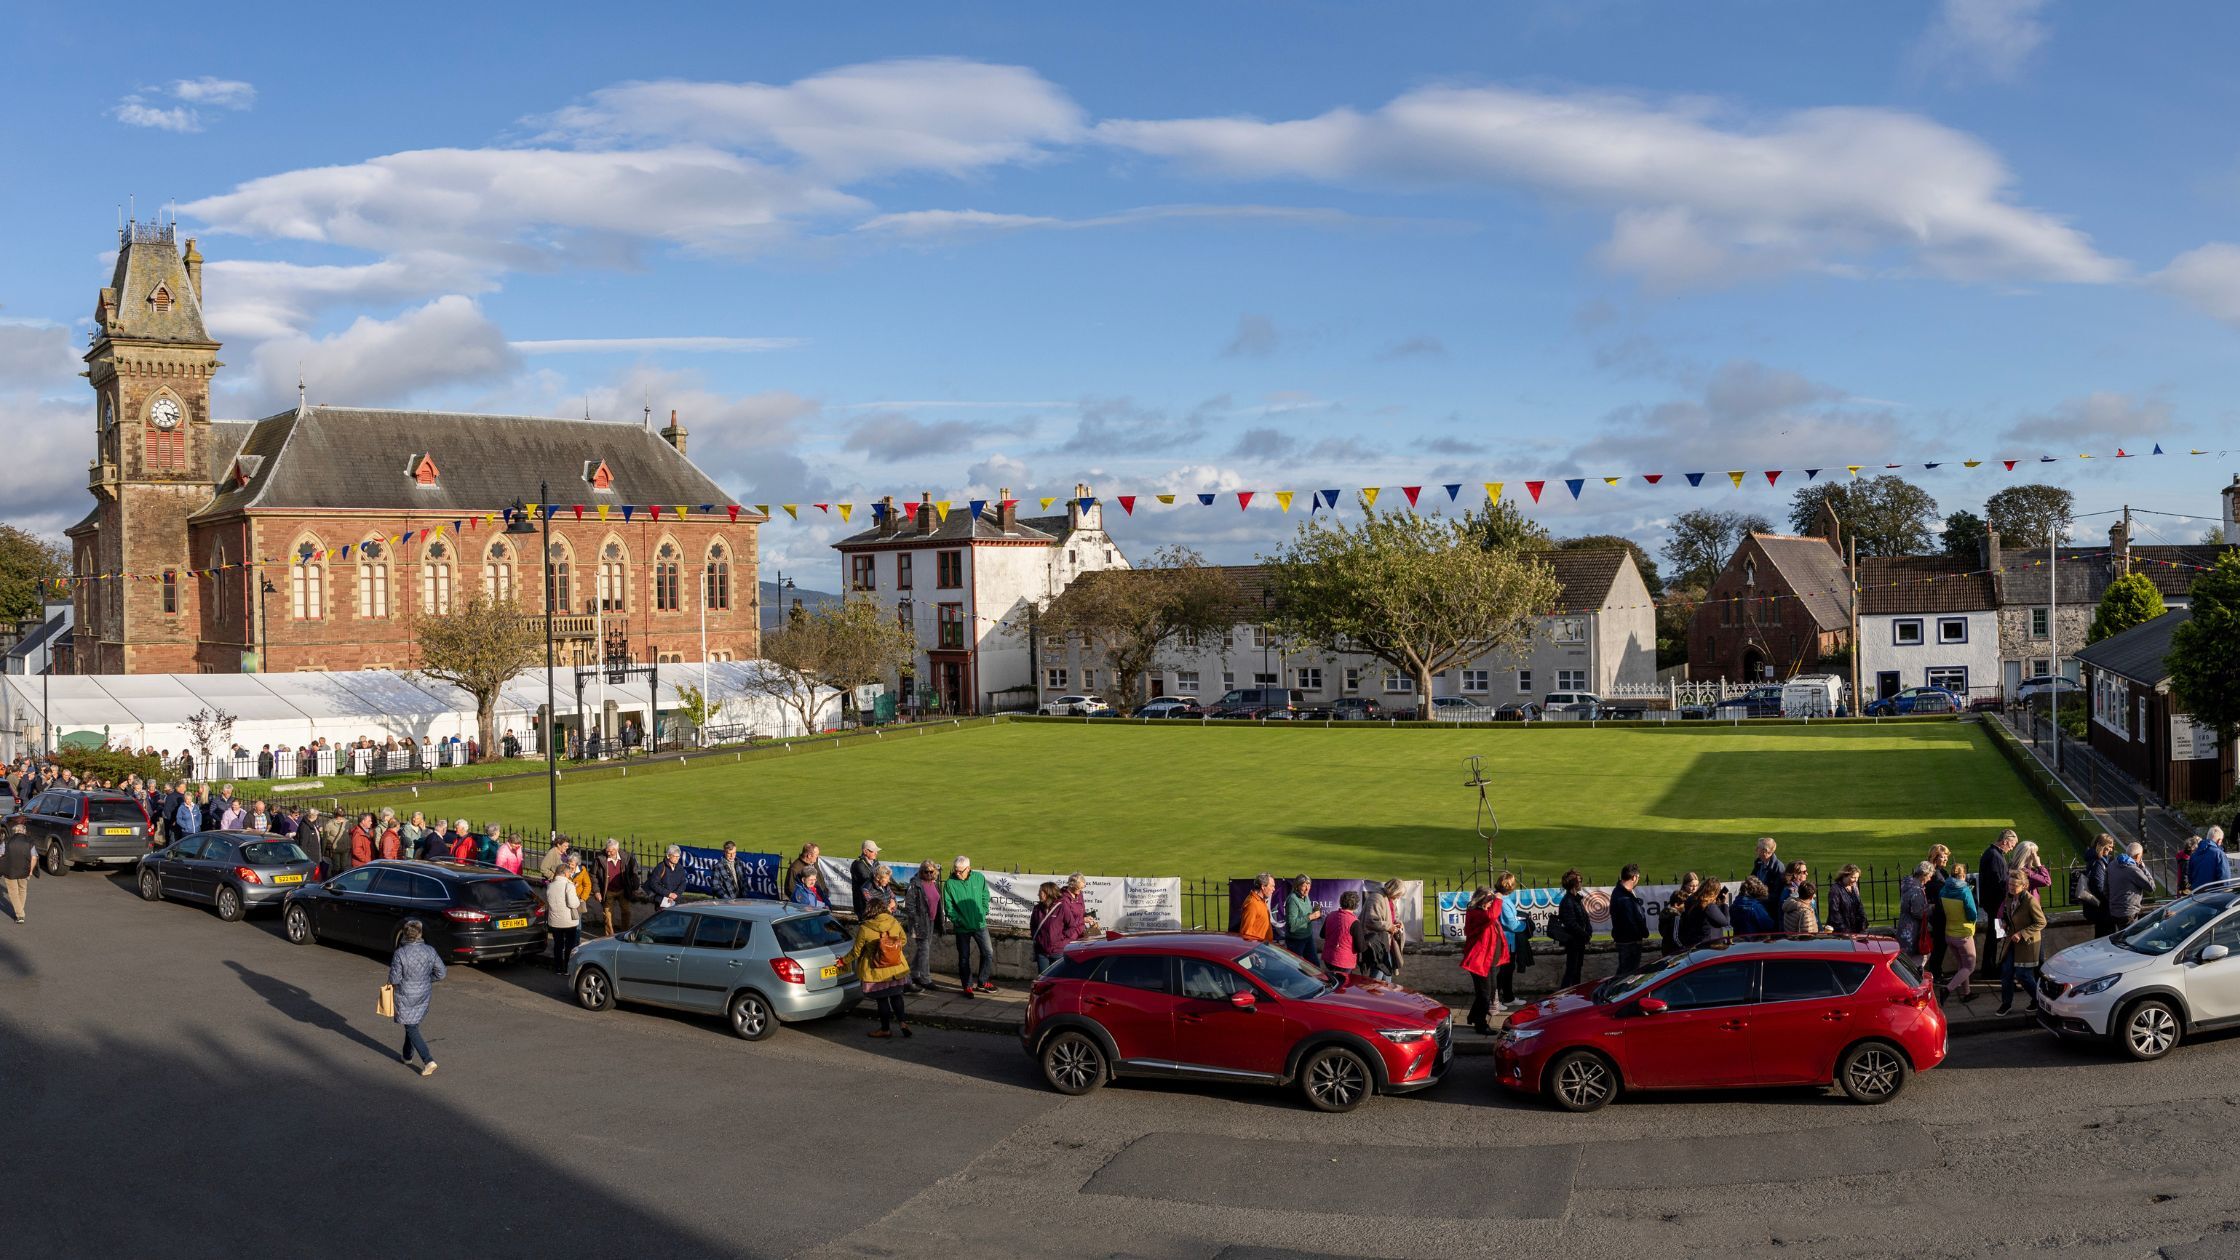 Panorama image of Wigtown with a large queue of people around the Bowling Green, at the centre of town. The County Buildings is in the background, with colourful bunting hung between lampposts.